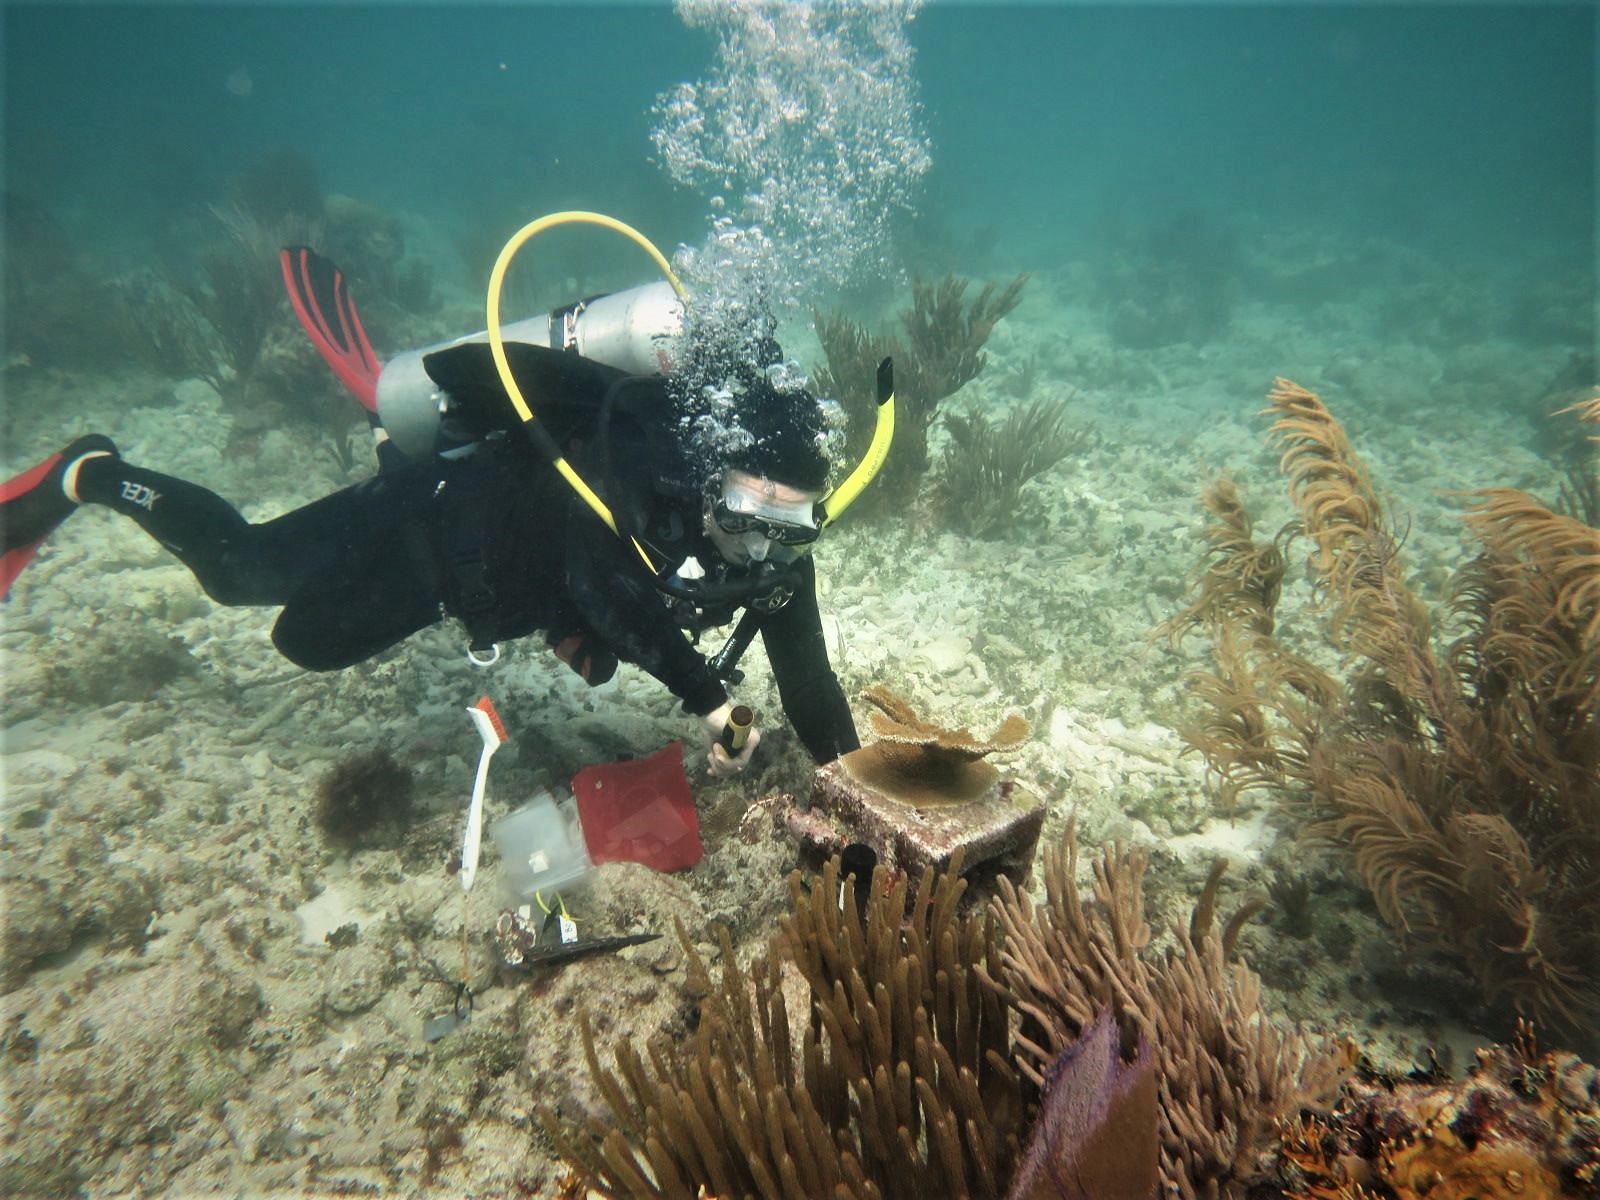 Dr. Kuffner examines coral in scuba gear.